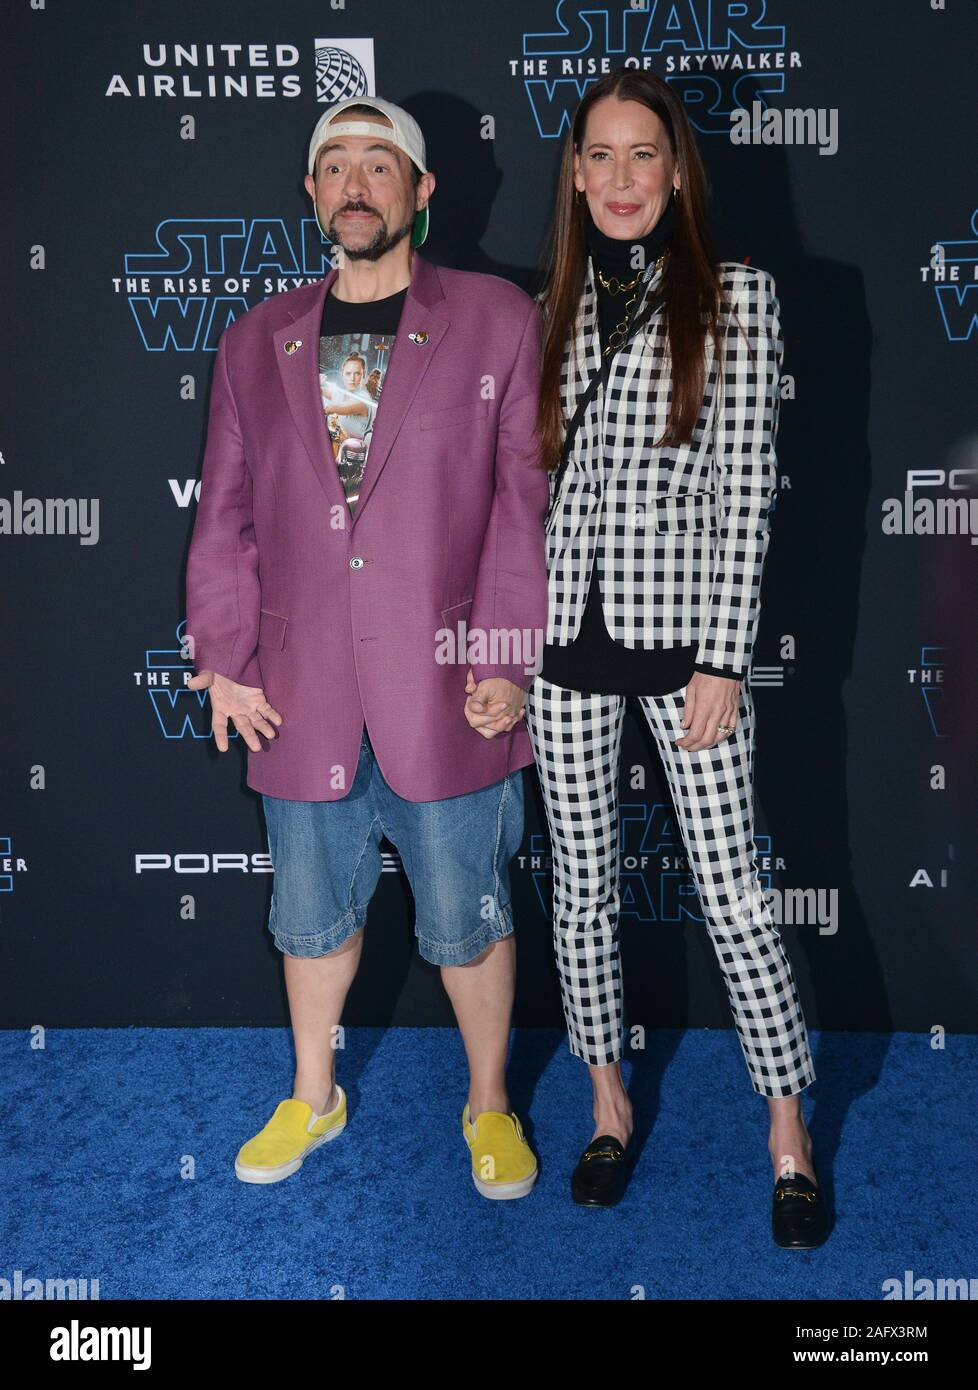 Los Angeles, USA. 17th Dec, 2019. Kevin Smith, Jennifer Schwalbach arrives at the premiere of Disney's 'Star Wars: The Rise Of The Skywalker' on December 16, 2019 in Hollywood, California Credit: Tsuni/USA/Alamy Live News Stock Photo